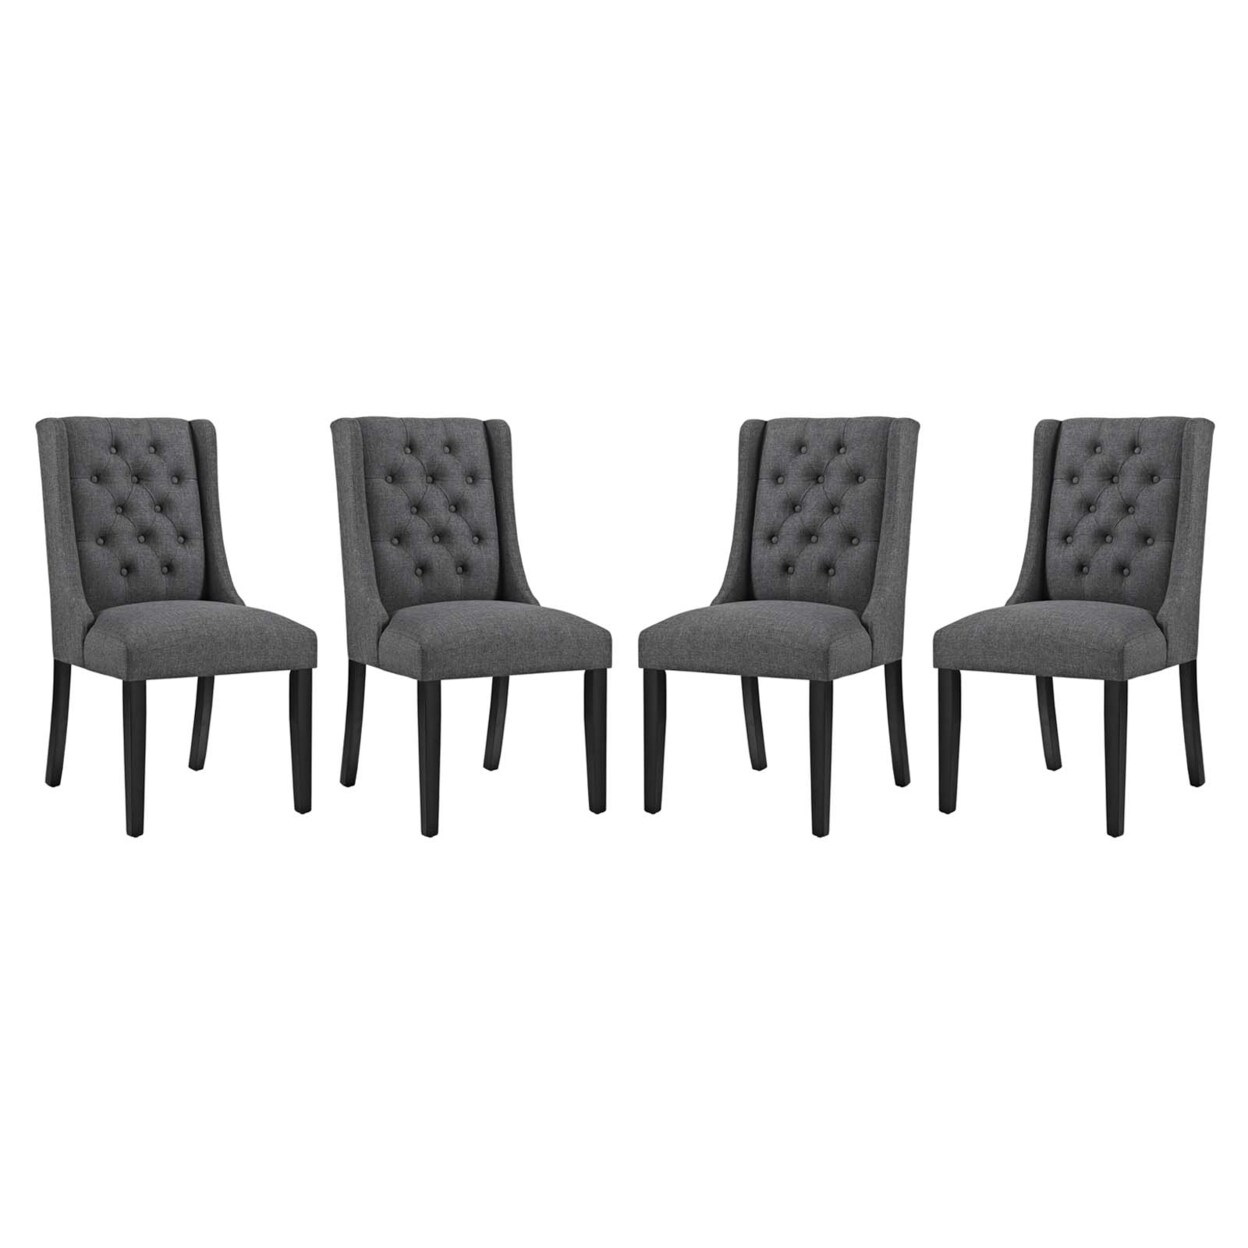 Modway Baronet Dining Chair Fabric Set Of 4 Eei 3558 Michaels